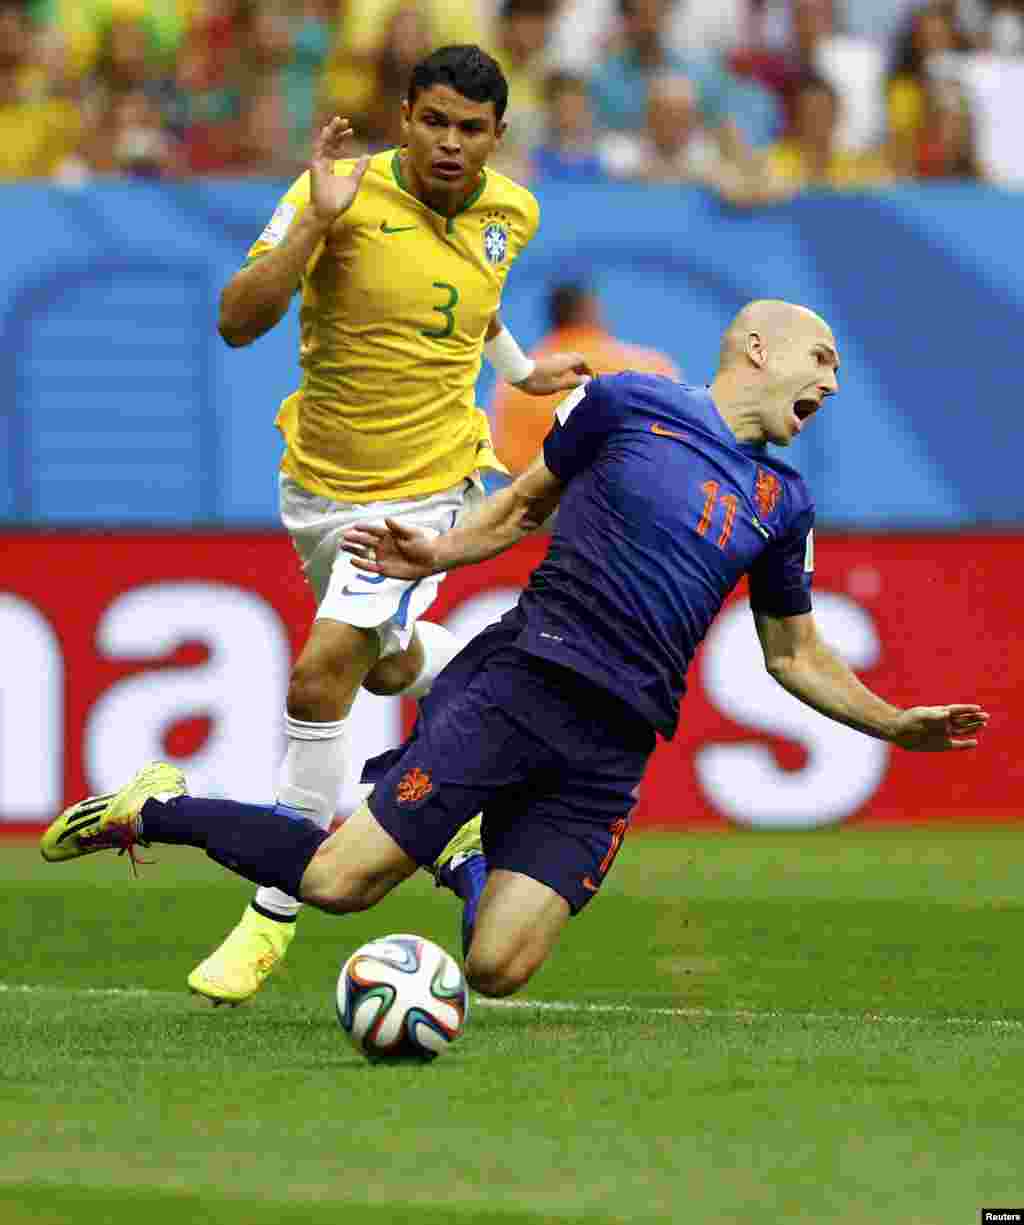 Brazil. 12Jul.Brazil's Thiago Silva (L) fouls Arjen Robben of the Netherlands to concede a penalty during their 2014 World Cup third-place playoff at the Brasilia national stadium in Brasilia